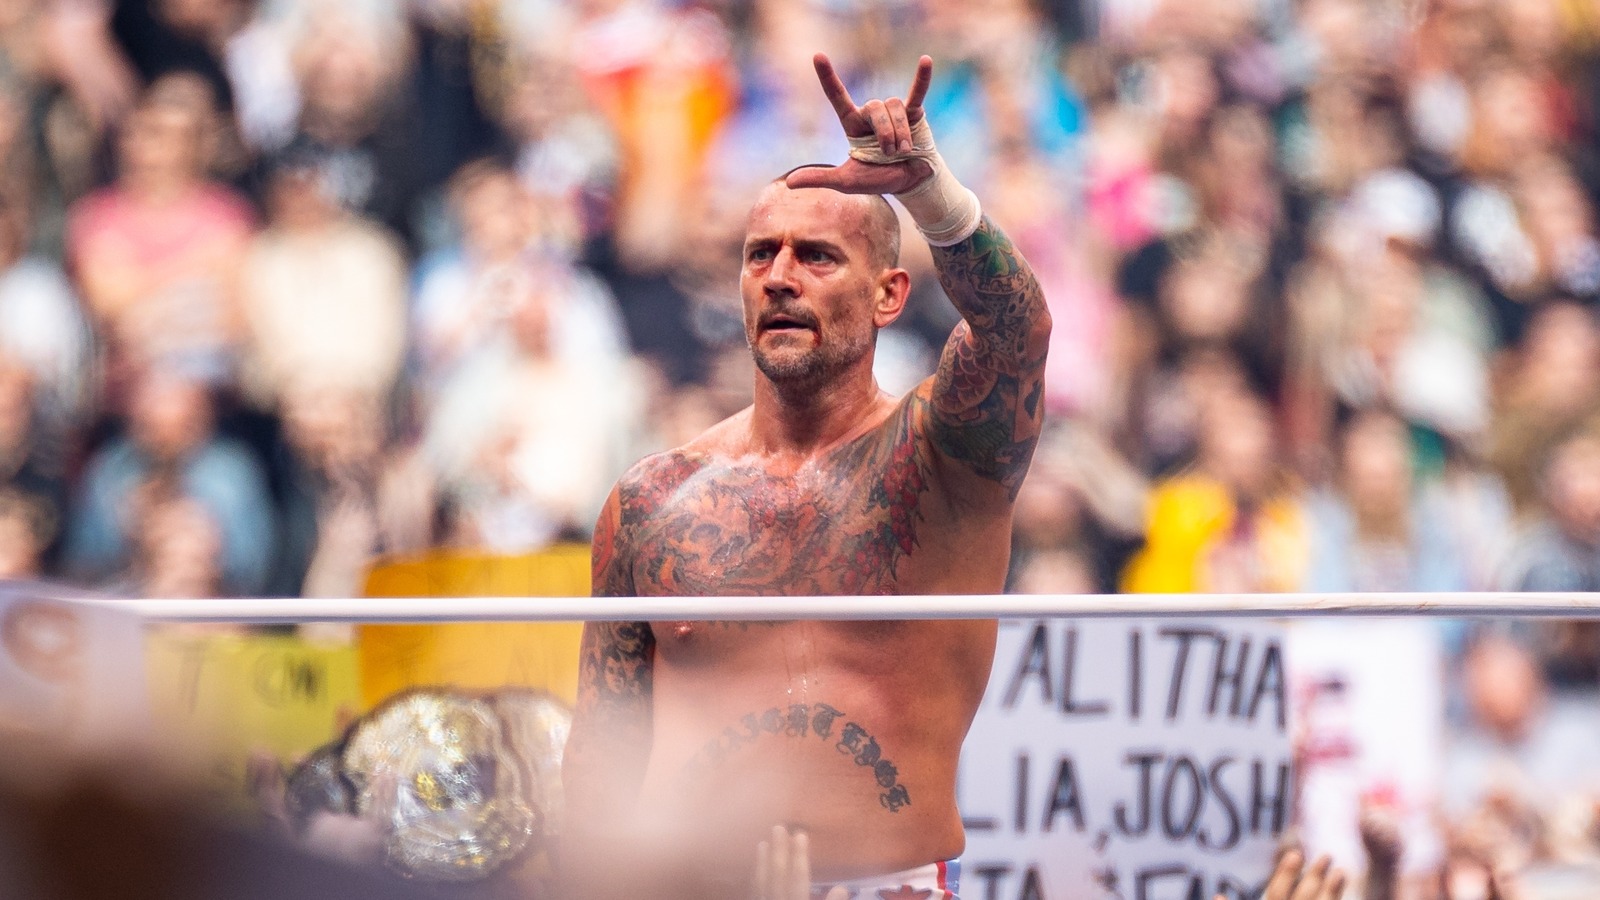 CM Punk Fired From AEW Following Backstage Incident At All In